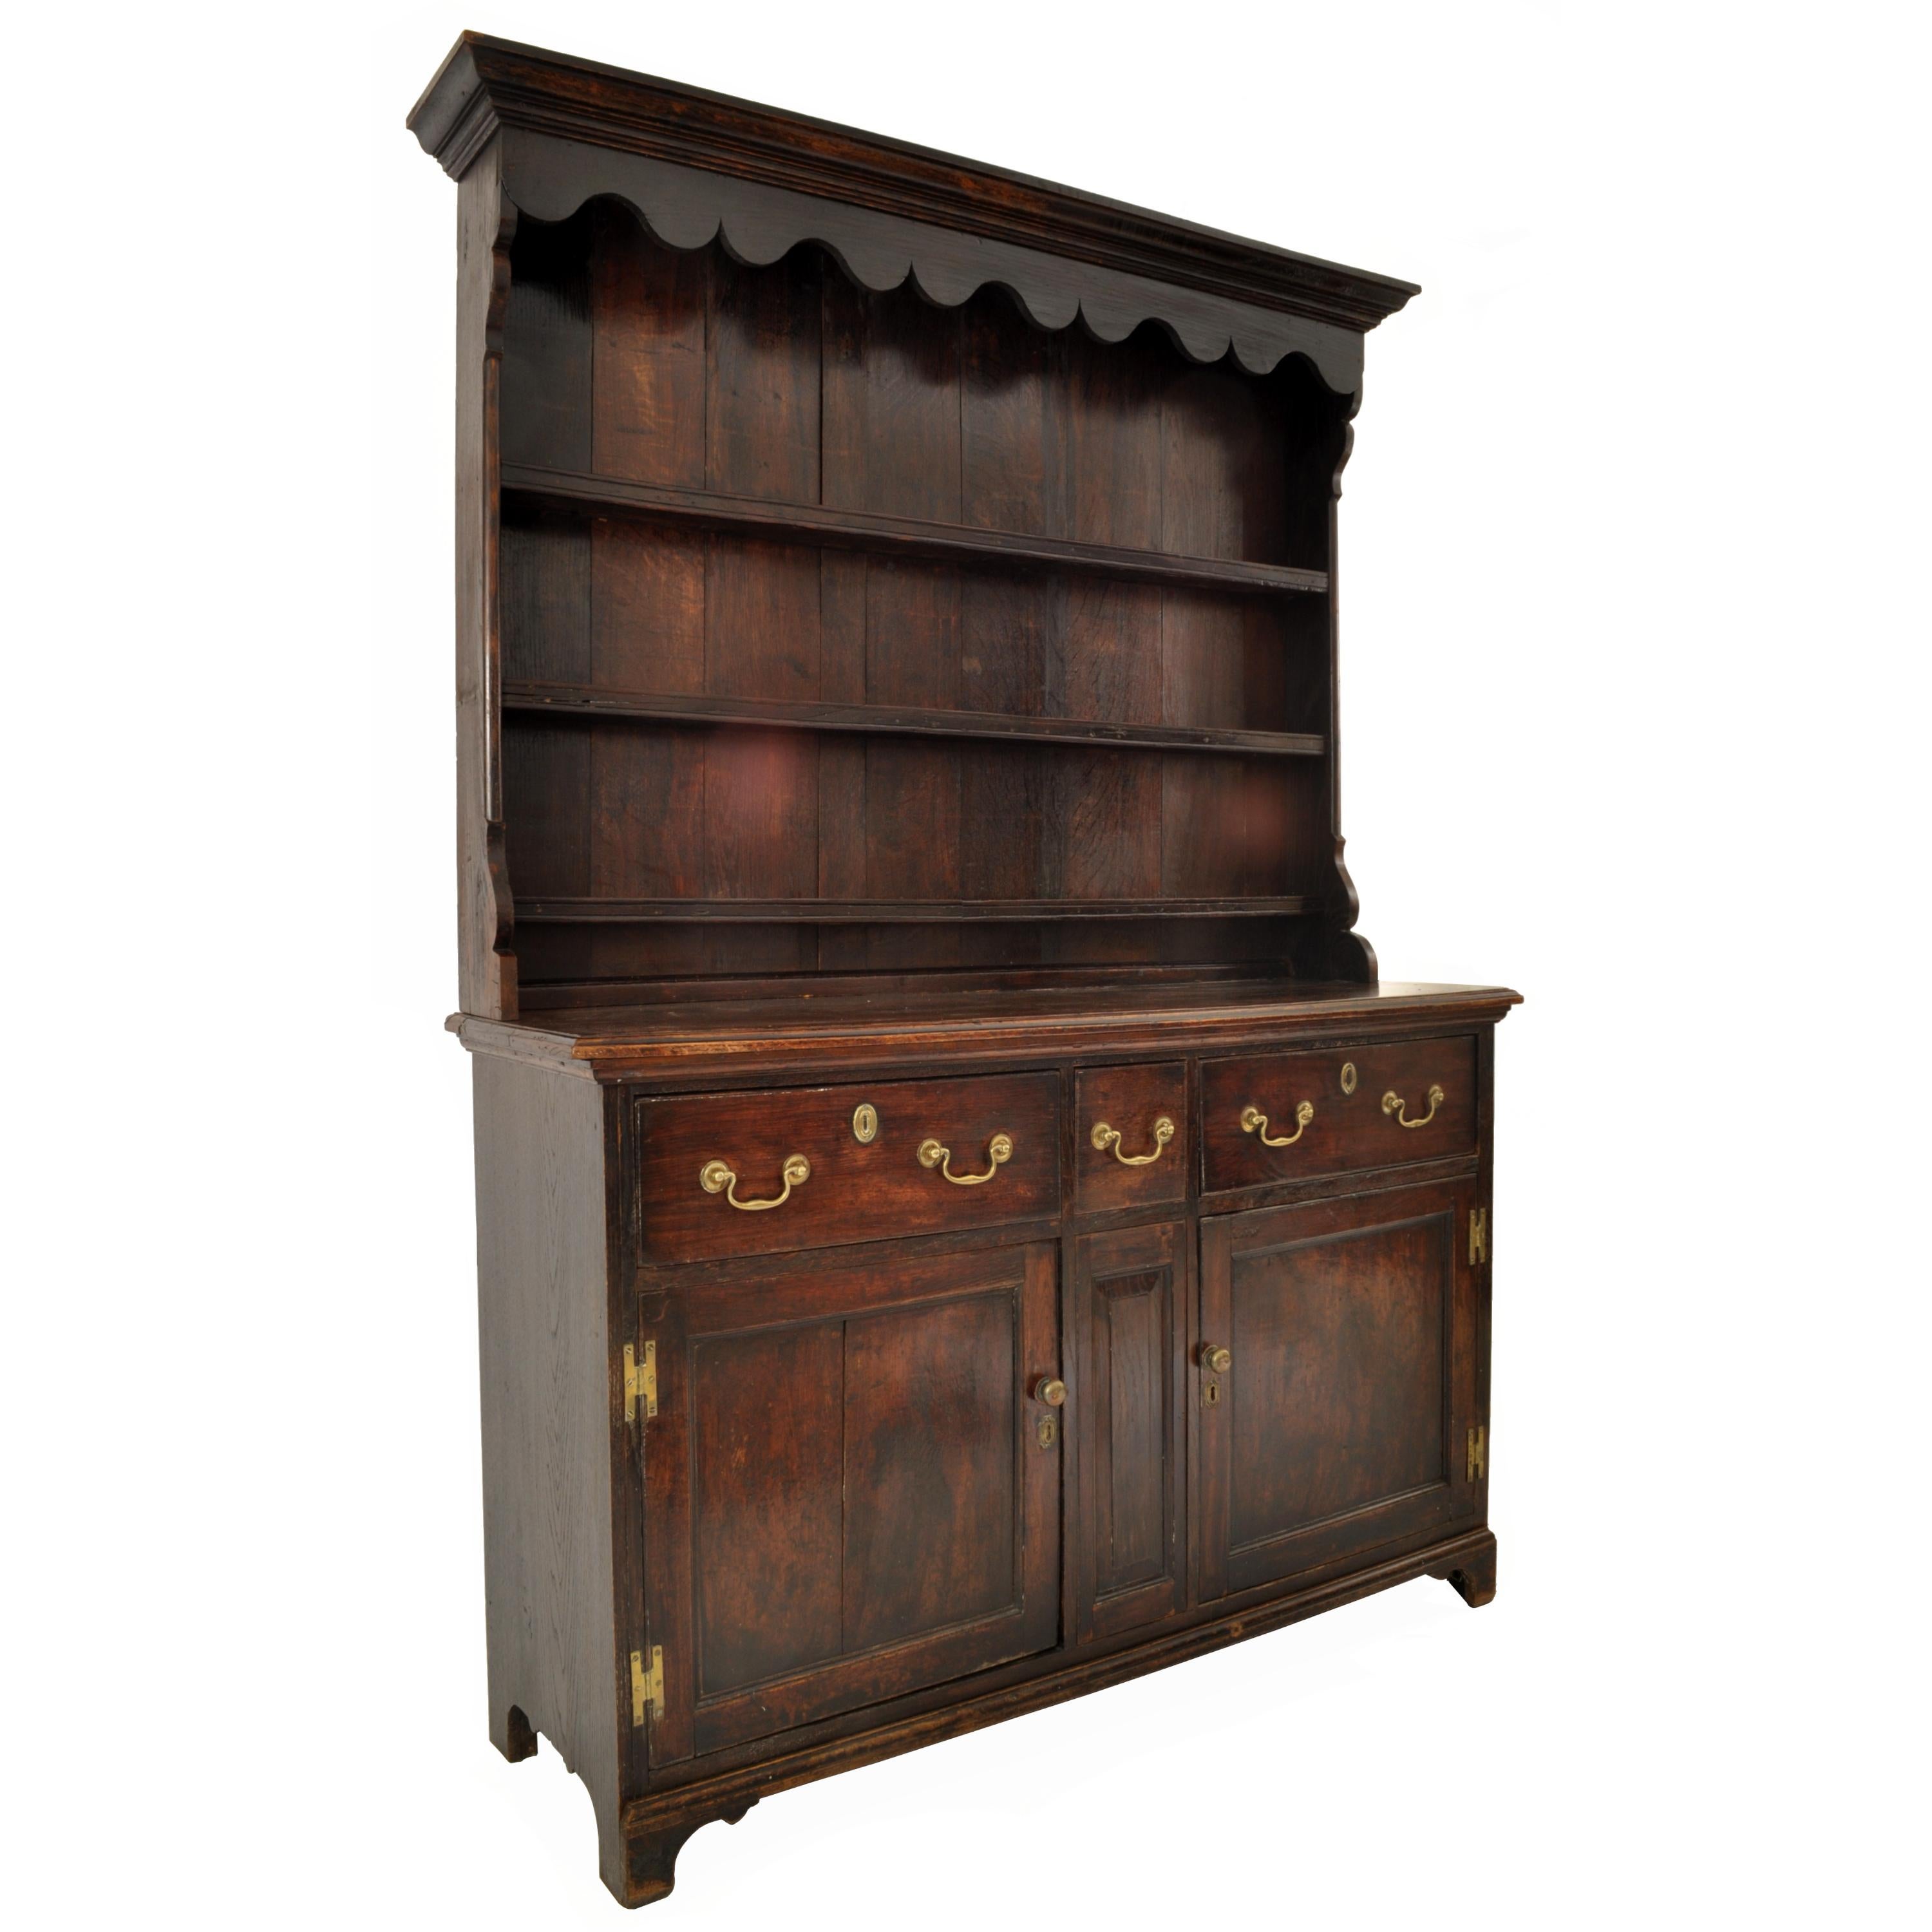 A good and diminuitive George III oak & elm dresser/cupboard, Circa 1780.
This dresser is in unusually period condition, with original finish and color. Thre dresser having a stepped cornice to the pot rack with a shaped apron below and three